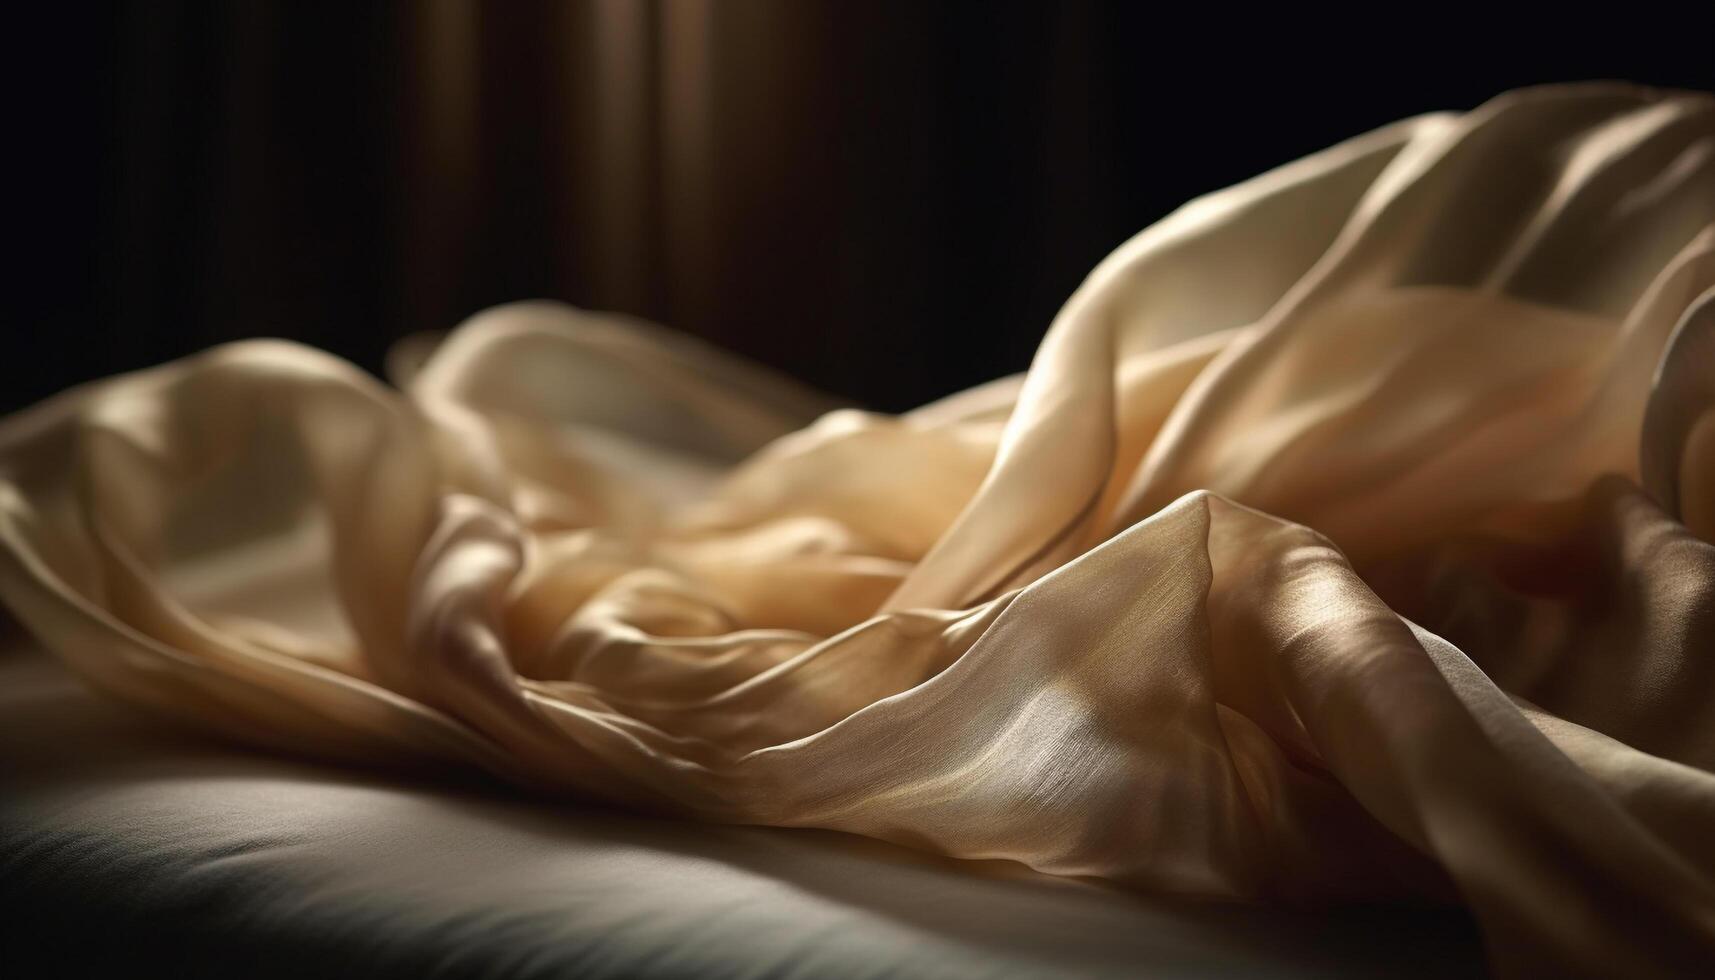 Silky smooth satin bedding adds elegance to bedroom decor generated by AI photo